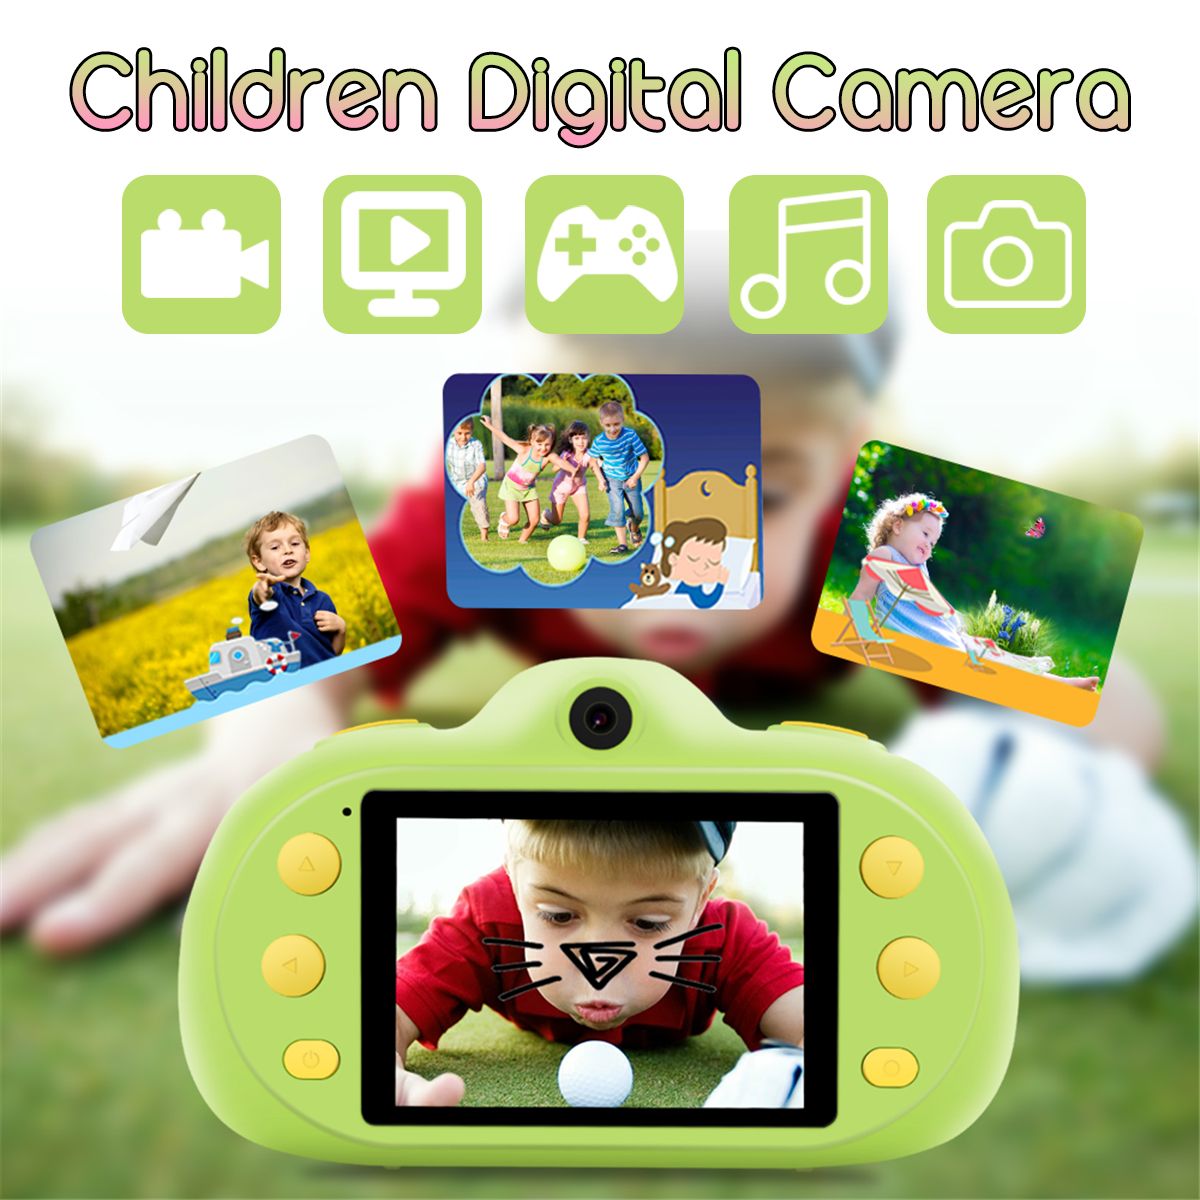 Children-Digital-Camera-24inch-8MP-HD-Camcorder-Action-Camera-For-Outdoor-Travel-1642011